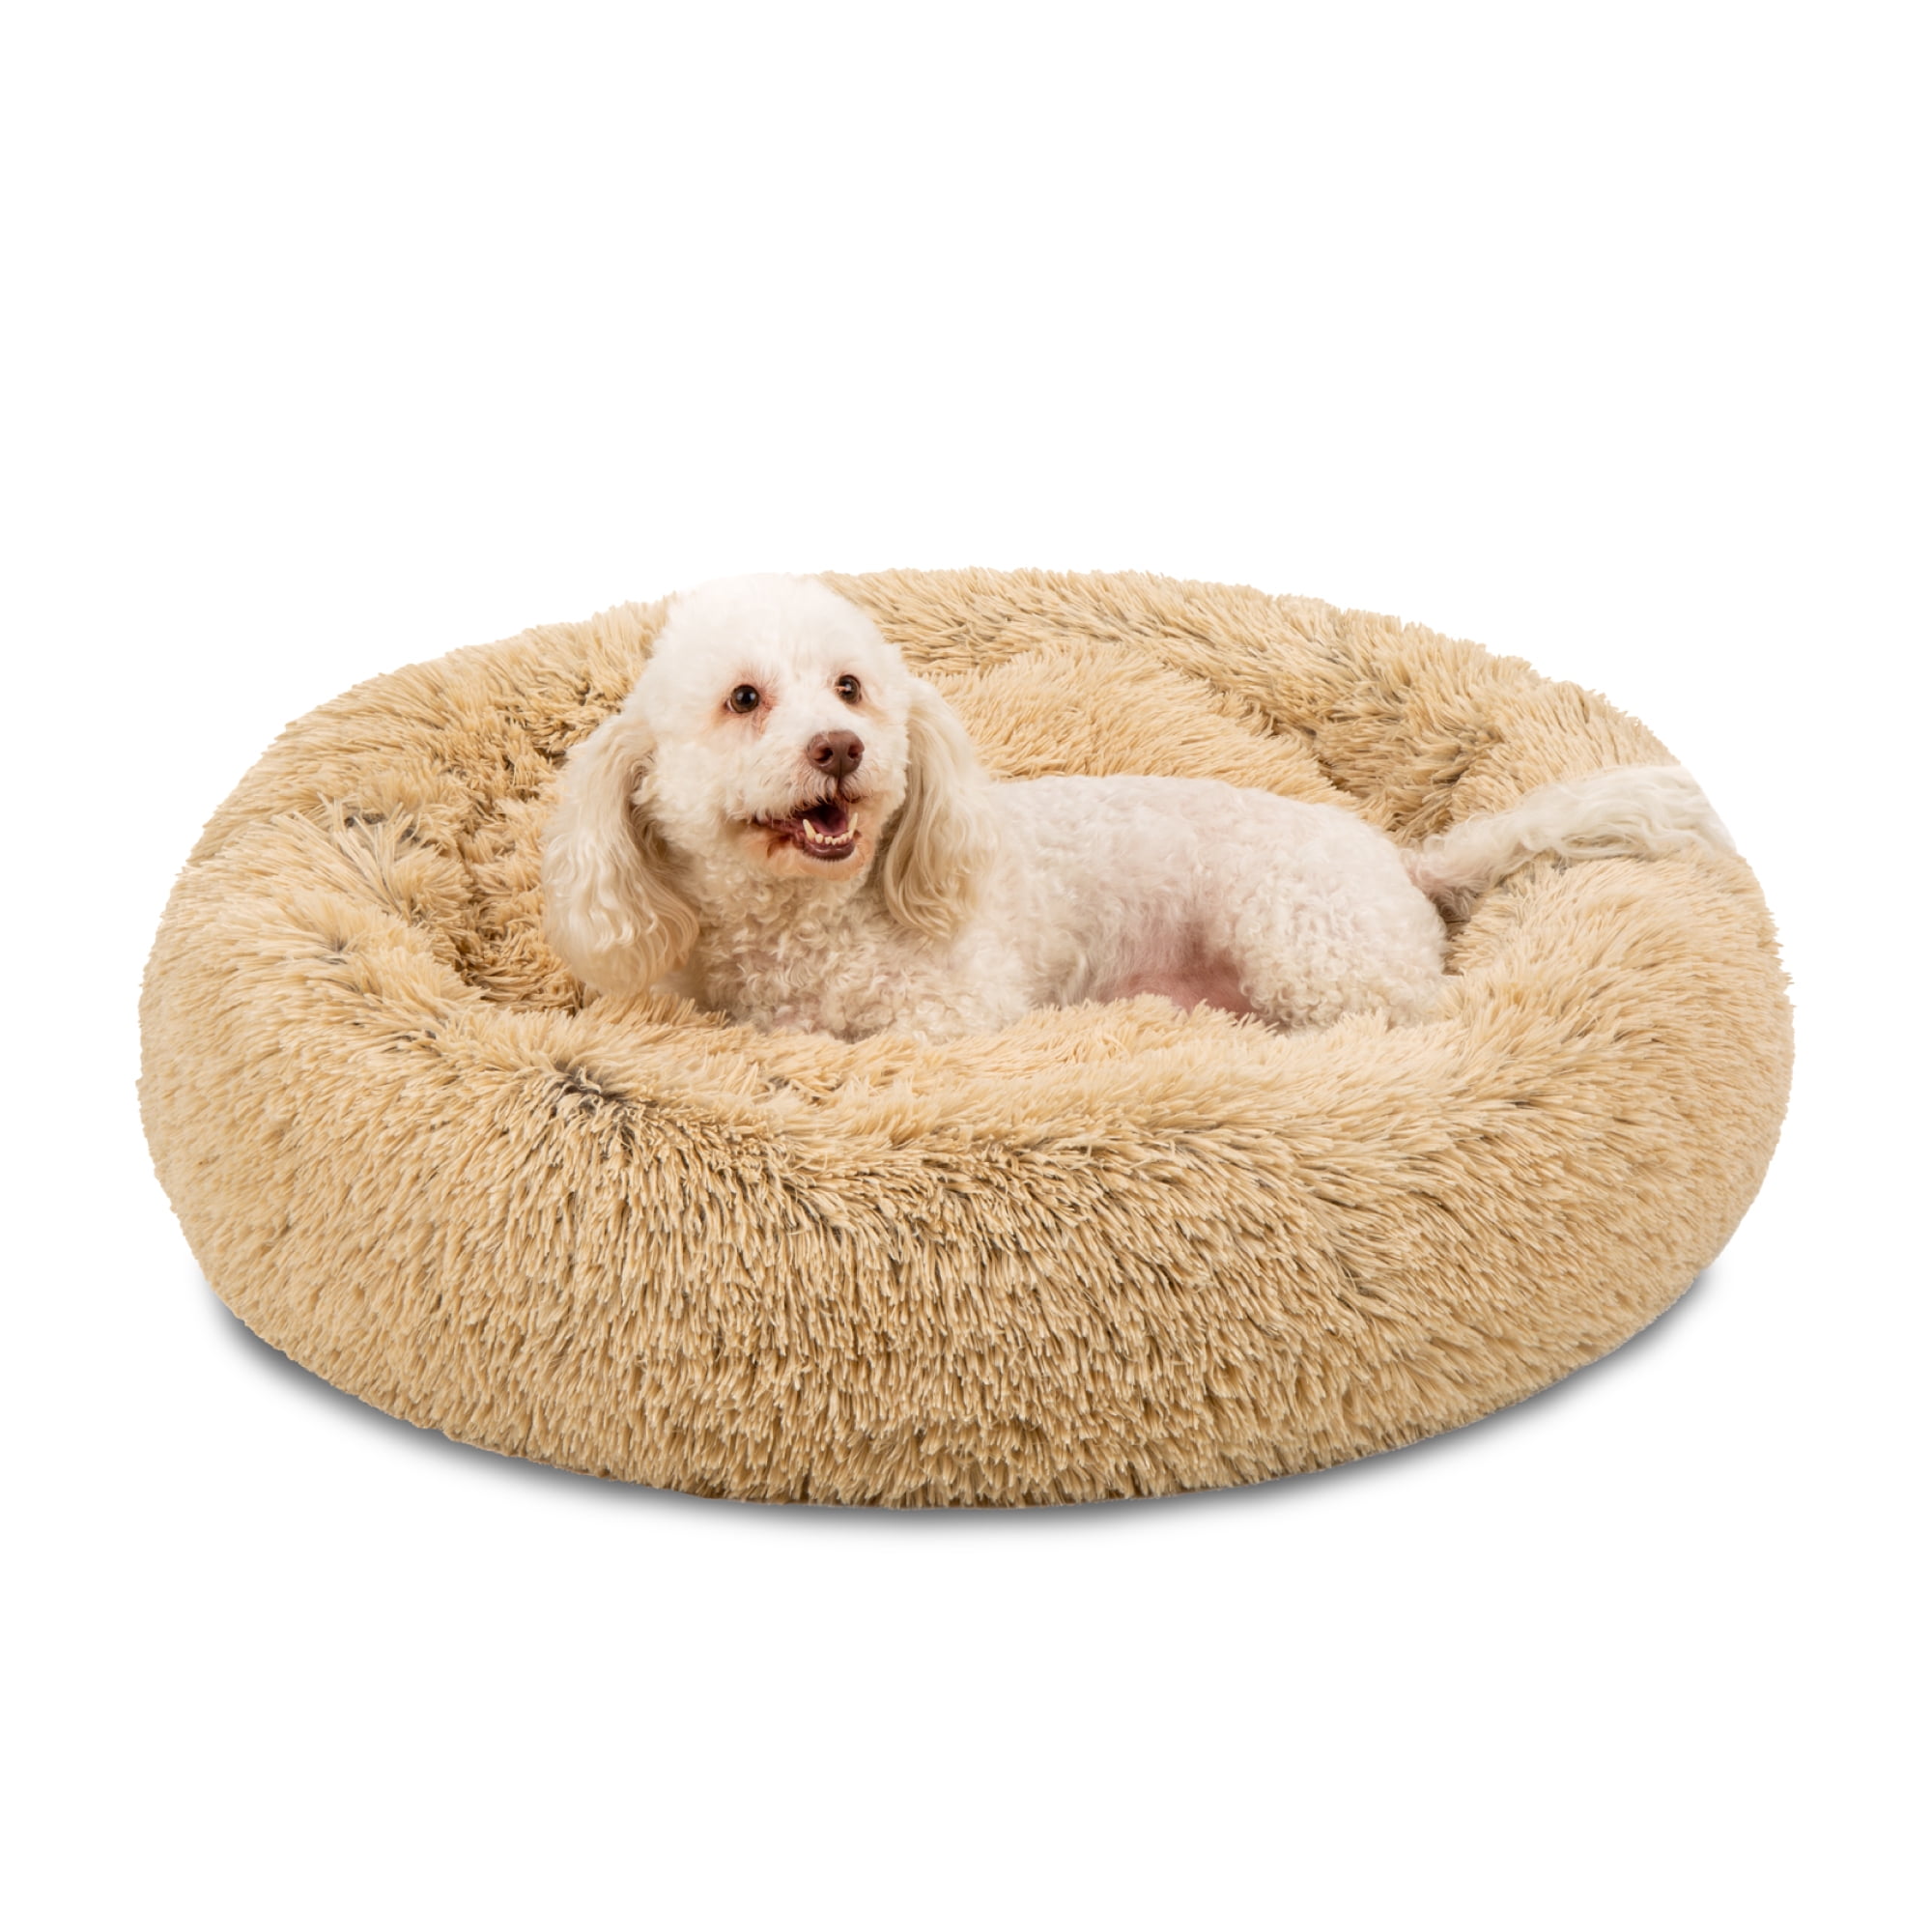 Raised Rim Best Choice Products Self-Warming Plush Shag Fur Donut Calming Pet Bed Cuddler w/Water-Resistant Lining 